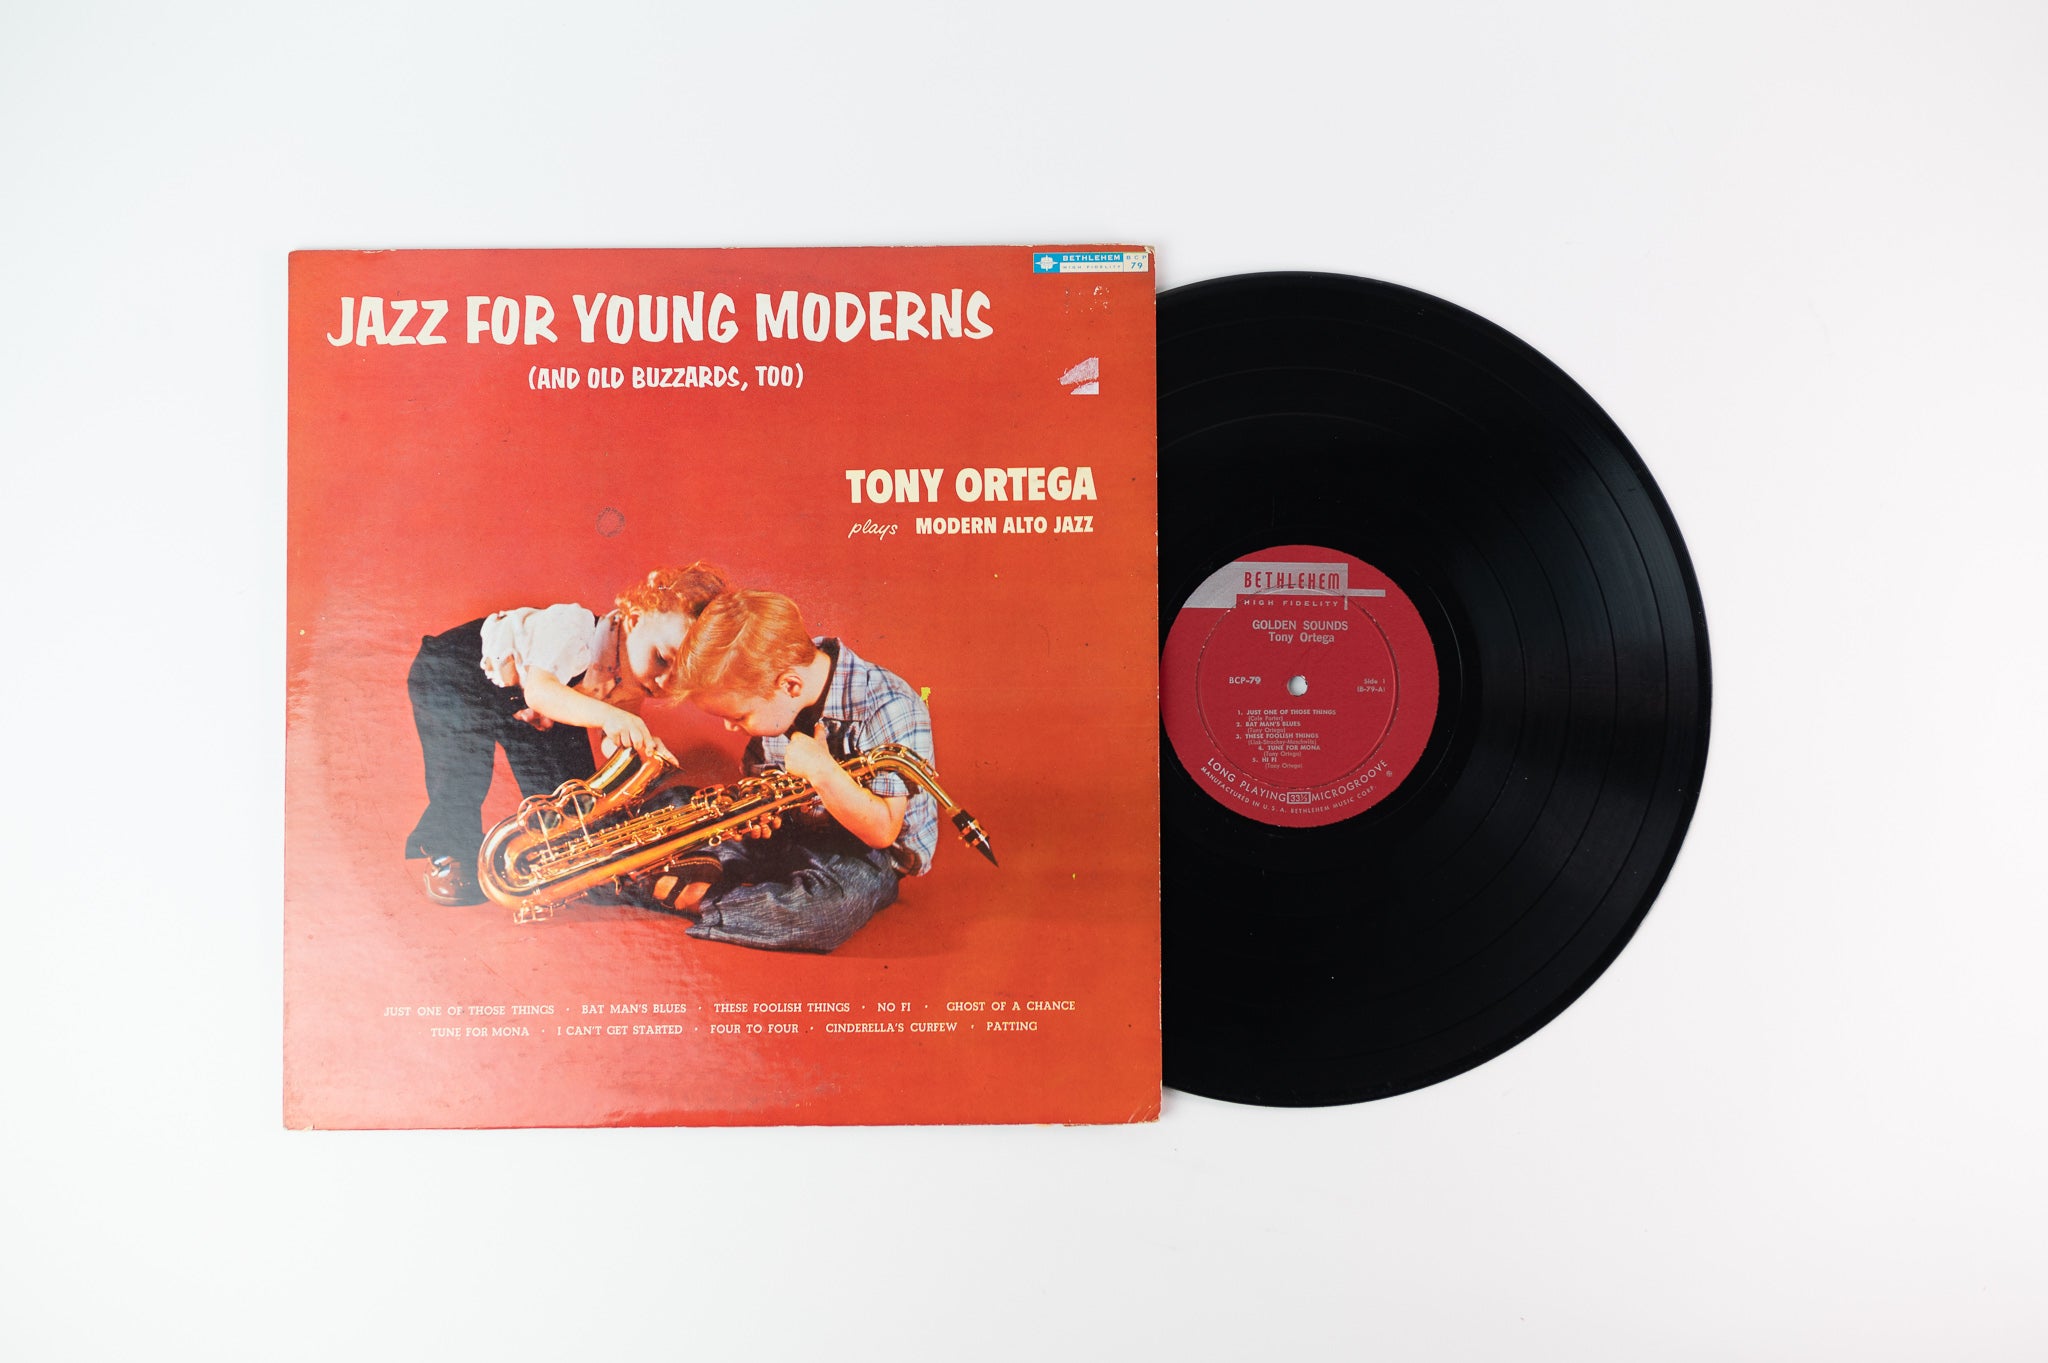 Anthony Ortega - Jazz For Young Moderns (And Old Buzzards, Too) on Bethlehem